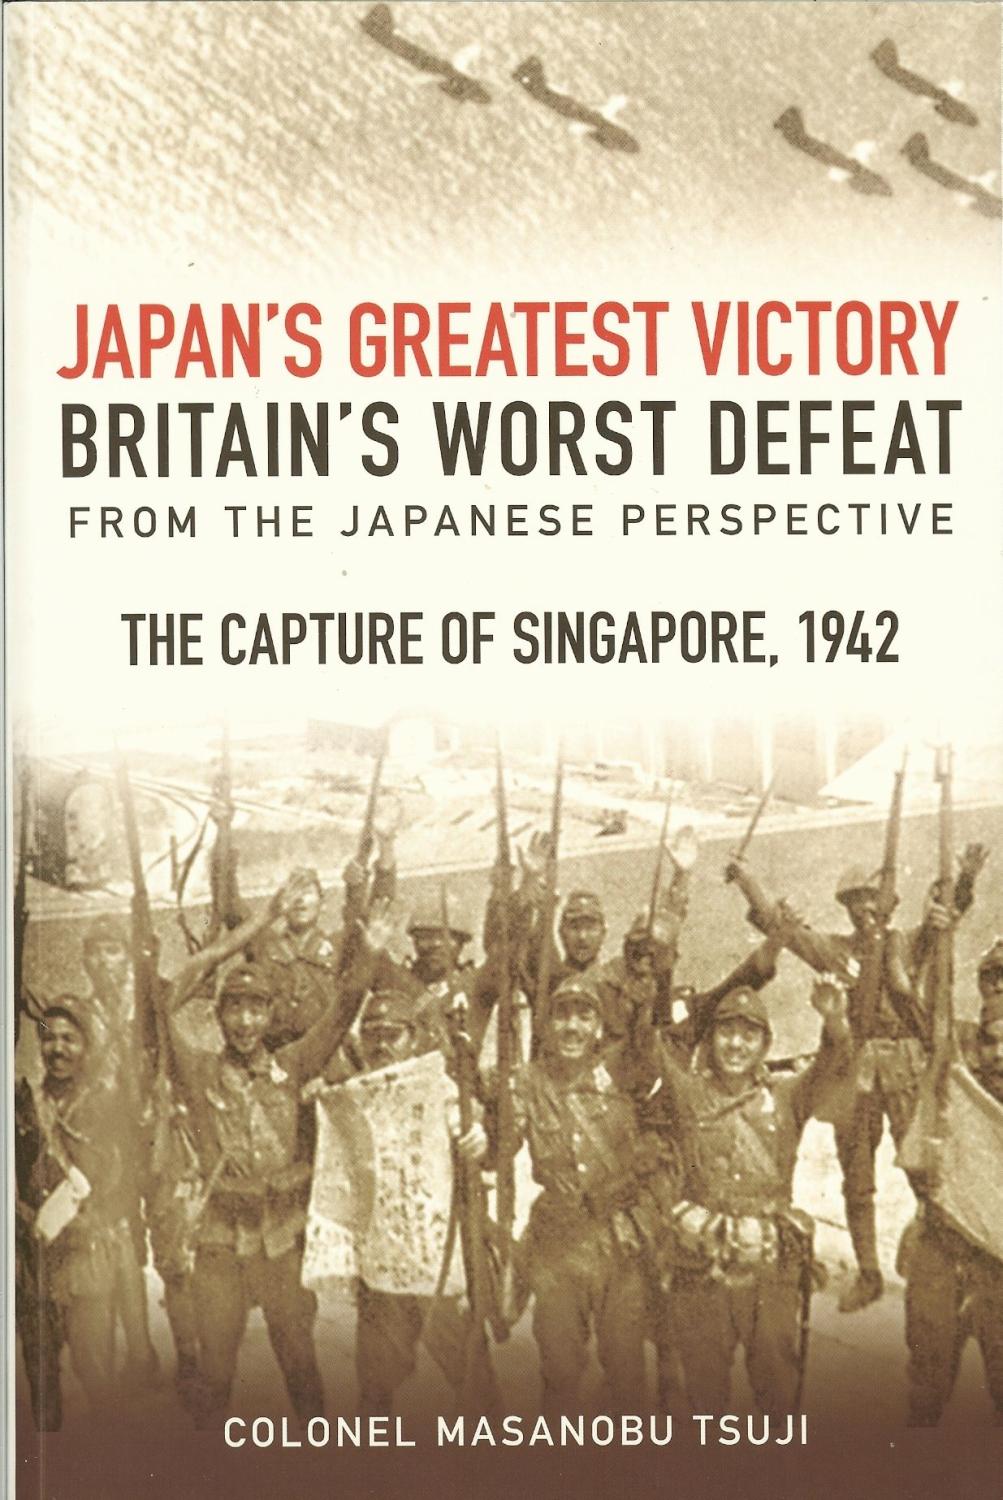 JAPAN'S GREATEST VICTORY, BRITAIN'S WORST DEFEAT FROM THE JAPANESE PERSPECTIVE : THE CAPTURE OF SINGAPORE, 1942. - Tsuji, Masanobu. Colonel.